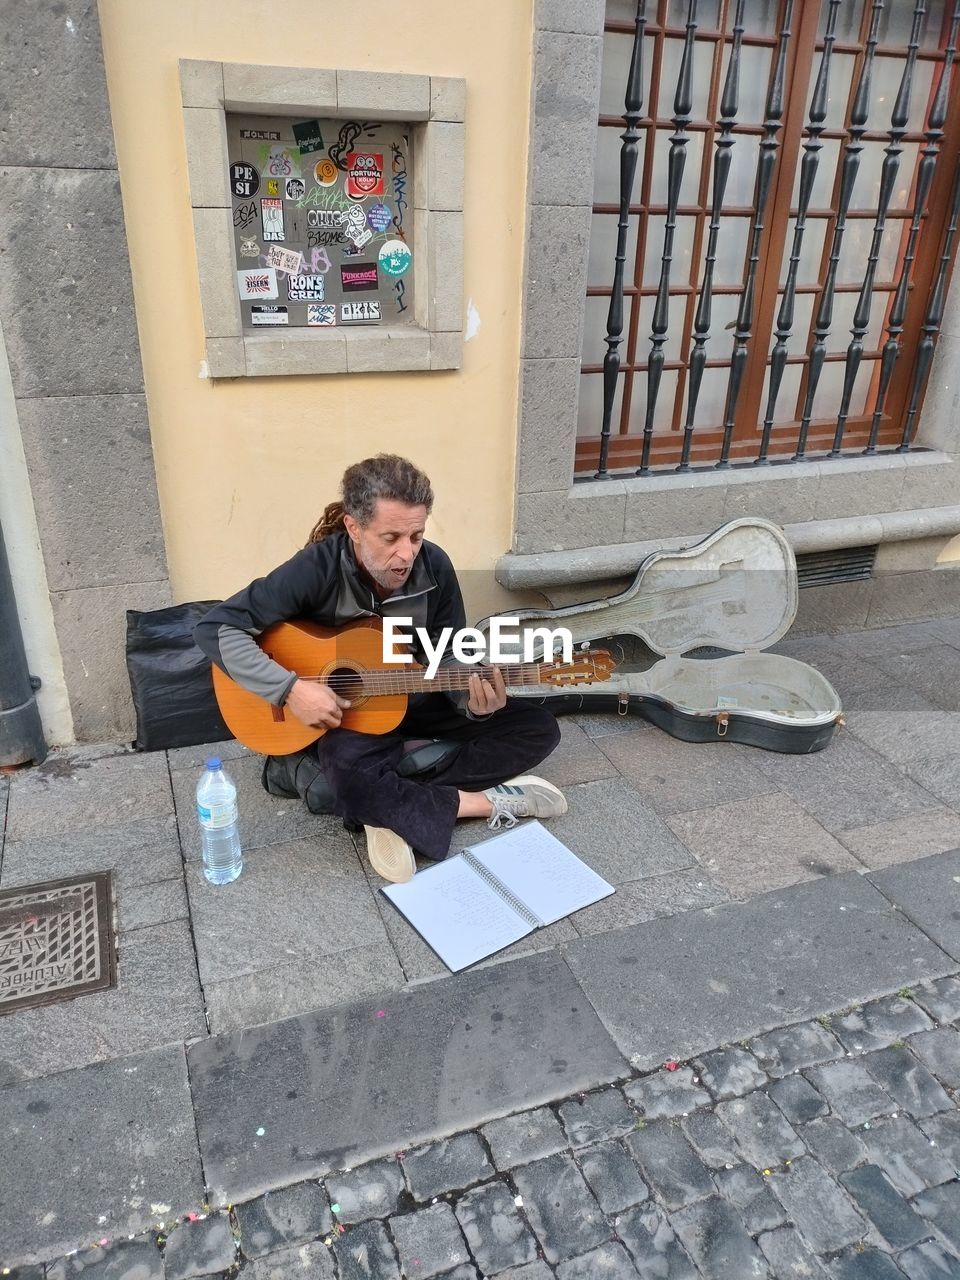 string instrument, guitar, musical instrument, music, musician, one person, full length, sitting, adult, arts culture and entertainment, musical equipment, street artist, plucking an instrument, men, street musician, day, leisure activity, city, young adult, architecture, holding, front view, casual clothing, acoustic guitar, performance, person, lifestyles, high angle view, creativity, electric guitar, wall, footpath, street, outdoors